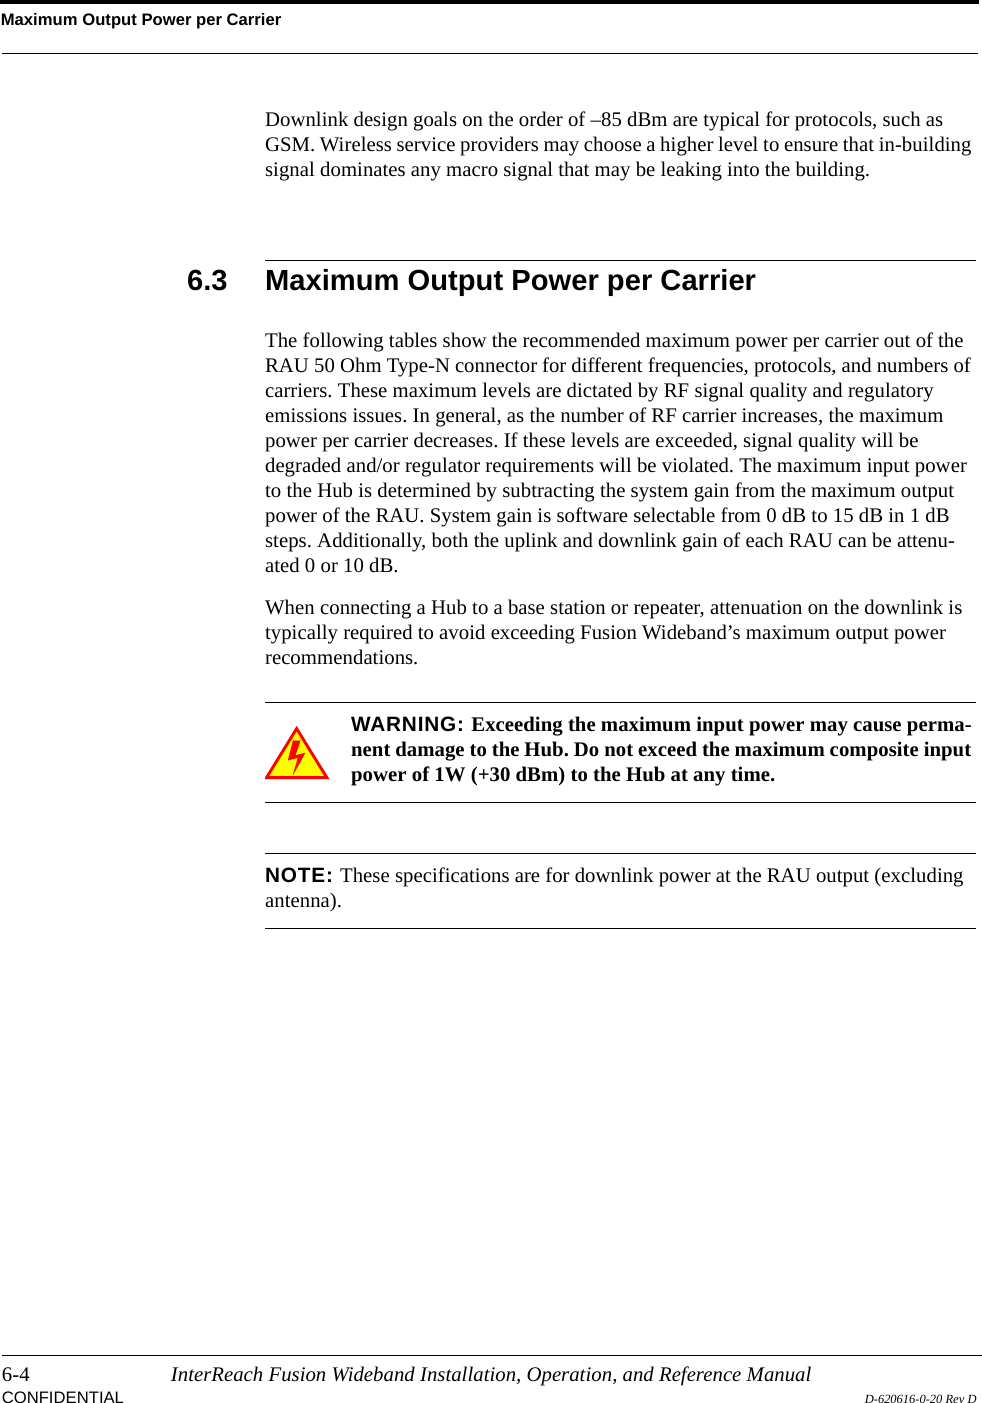 Maximum Output Power per Carrier6-4 InterReach Fusion Wideband Installation, Operation, and Reference ManualCONFIDENTIAL D-620616-0-20 Rev DDownlink design goals on the order of –85 dBm are typical for protocols, such as GSM. Wireless service providers may choose a higher level to ensure that in-building signal dominates any macro signal that may be leaking into the building.6.3 Maximum Output Power per CarrierThe following tables show the recommended maximum power per carrier out of the RAU 50 Ohm Type-N connector for different frequencies, protocols, and numbers of carriers. These maximum levels are dictated by RF signal quality and regulatory emissions issues. In general, as the number of RF carrier increases, the maximum power per carrier decreases. If these levels are exceeded, signal quality will be degraded and/or regulator requirements will be violated. The maximum input power to the Hub is determined by subtracting the system gain from the maximum output power of the RAU. System gain is software selectable from 0 dB to 15 dB in 1 dB steps. Additionally, both the uplink and downlink gain of each RAU can be attenu-ated 0 or 10 dB.When connecting a Hub to a base station or repeater, attenuation on the downlink is typically required to avoid exceeding Fusion Wideband’s maximum output power recommendations.WARNING: Exceeding the maximum input power may cause perma-nent damage to the Hub. Do not exceed the maximum composite input power of 1W (+30 dBm) to the Hub at any time.NOTE: These specifications are for downlink power at the RAU output (excluding antenna).